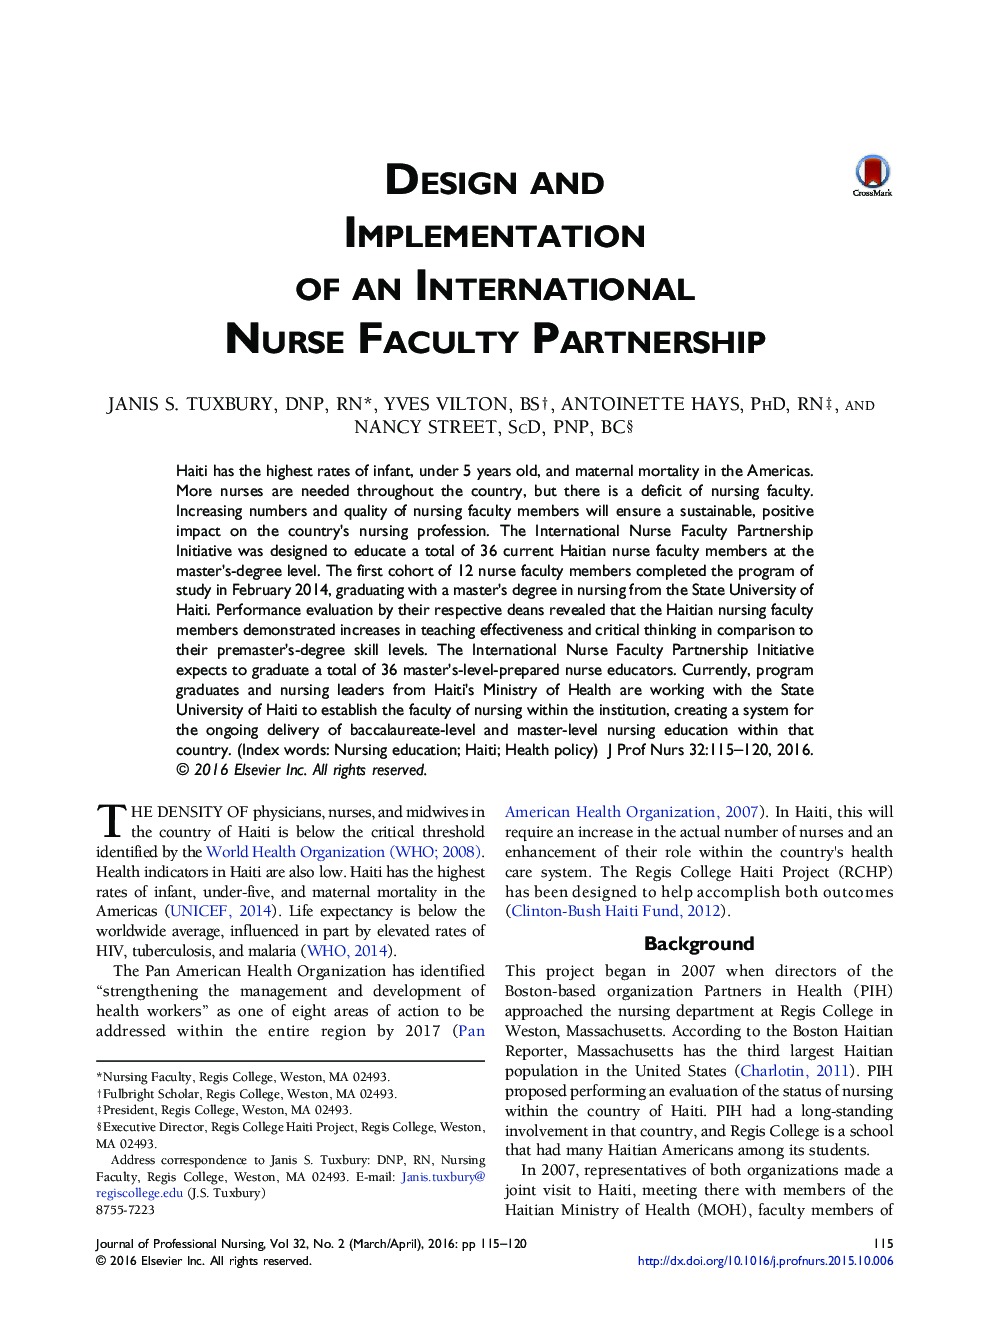 Design and Implementation of an International Nurse Faculty Partnership